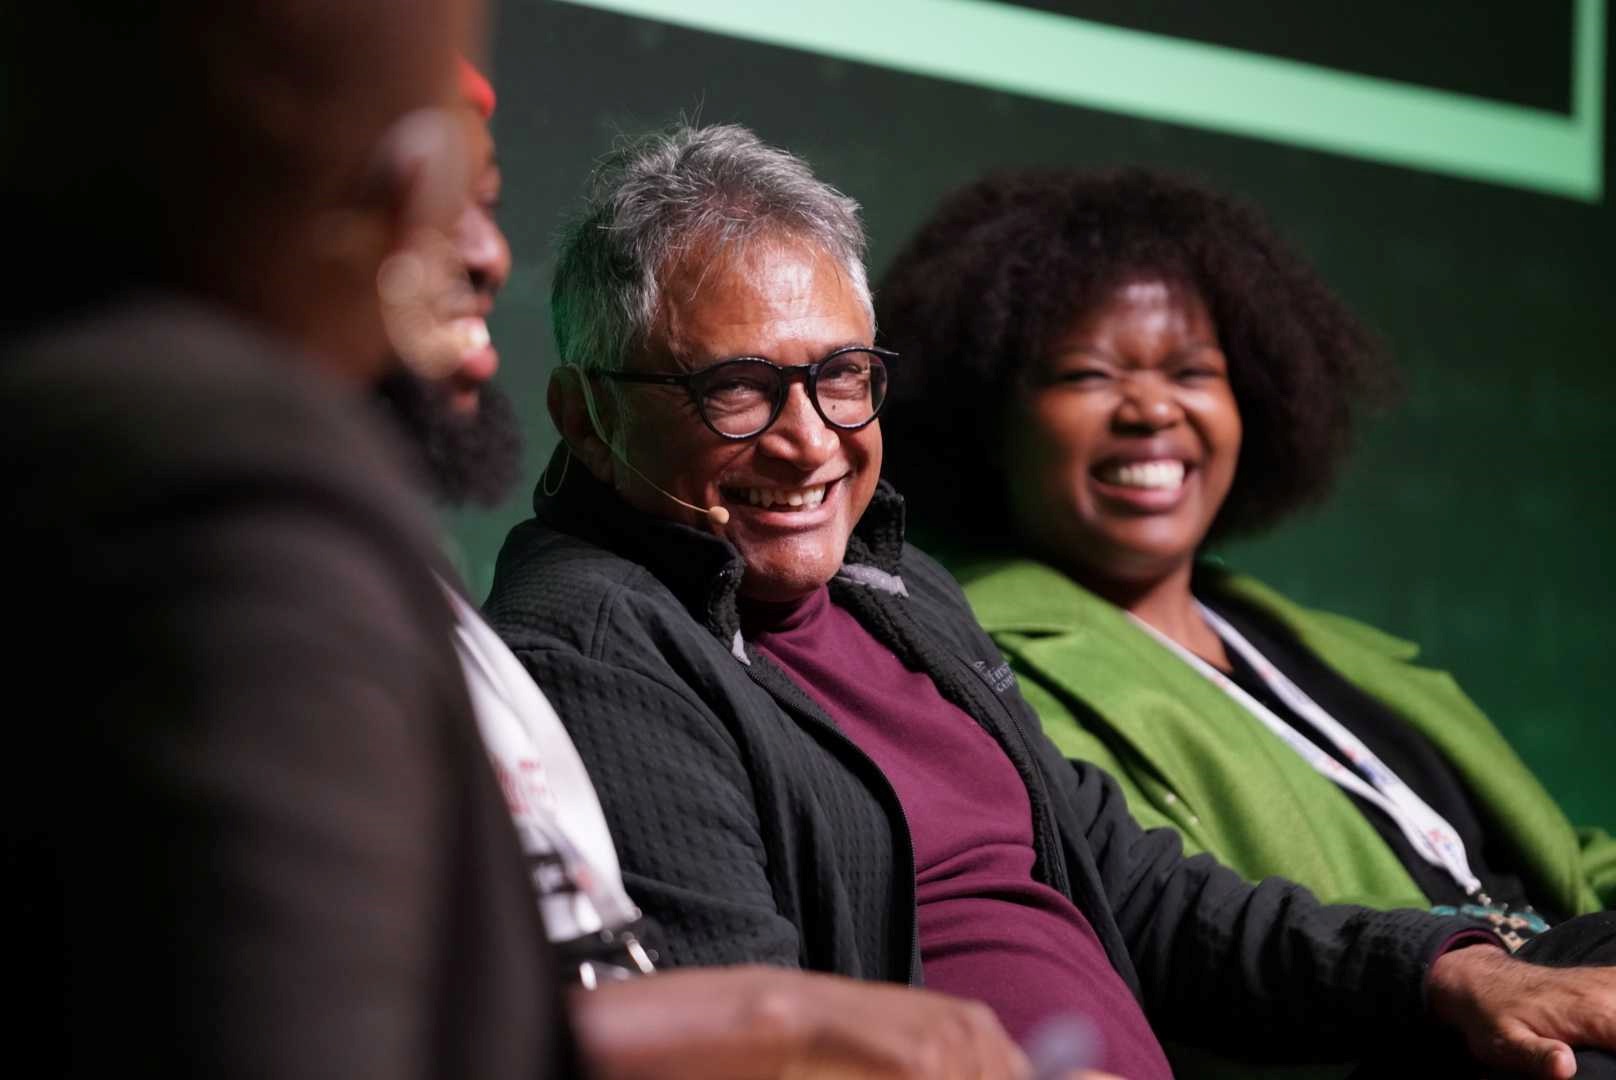 Don't give up on SA just yet: 6 tips for the future from News24's summit